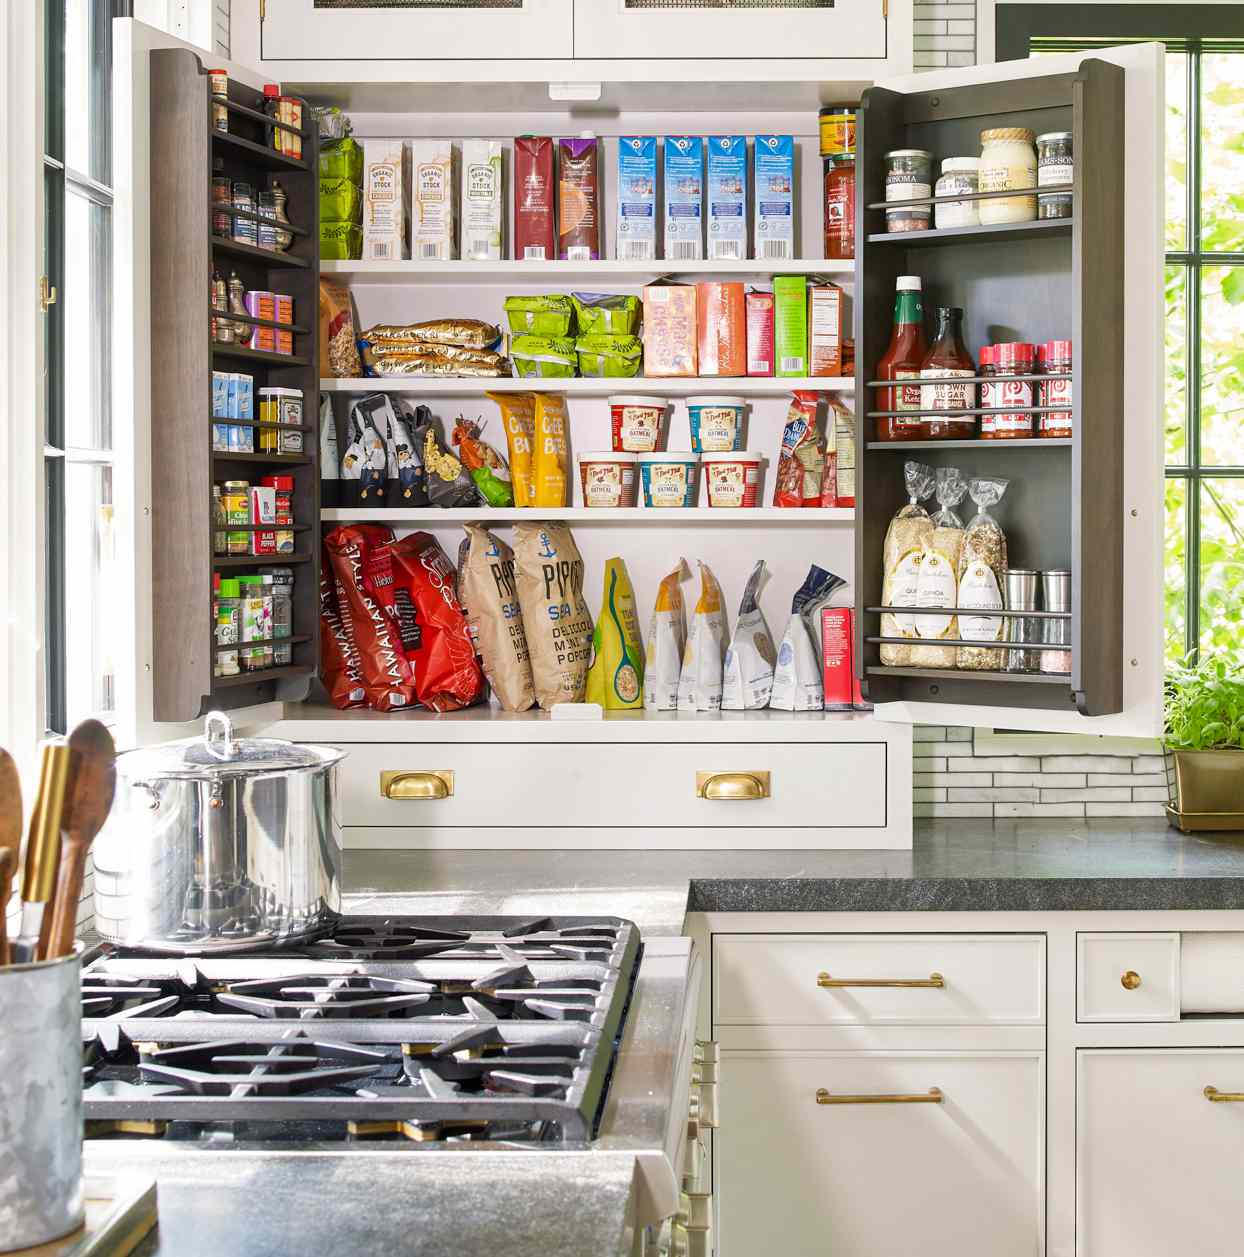 25 Brilliant Ideas for Organizing Kitchen Cabinets   Better Homes ...